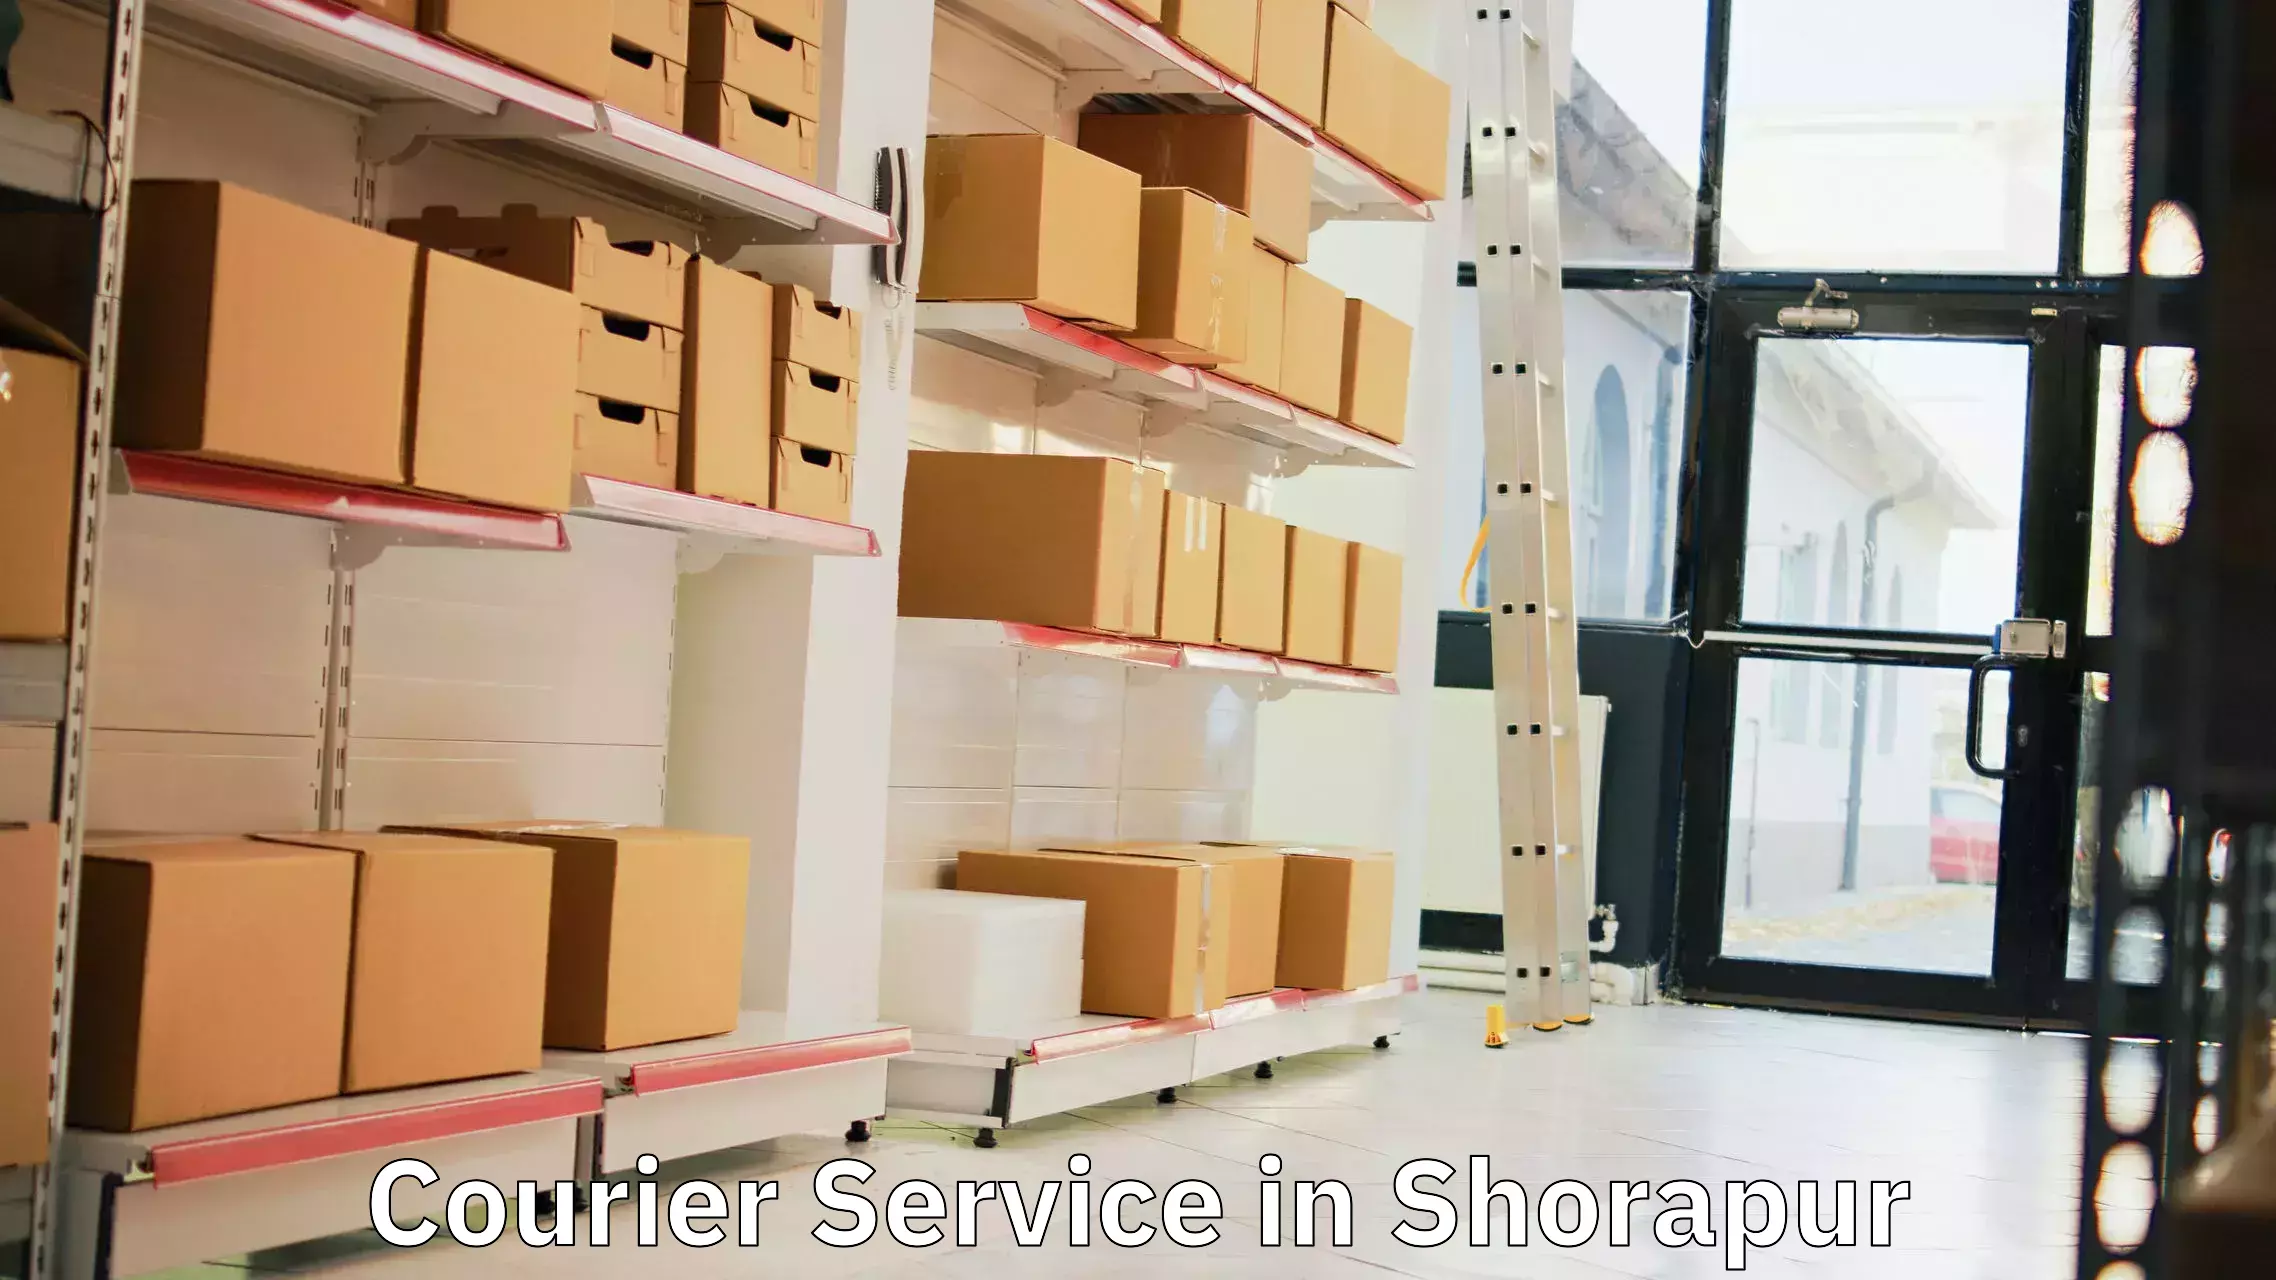 Postal and courier services in Shorapur